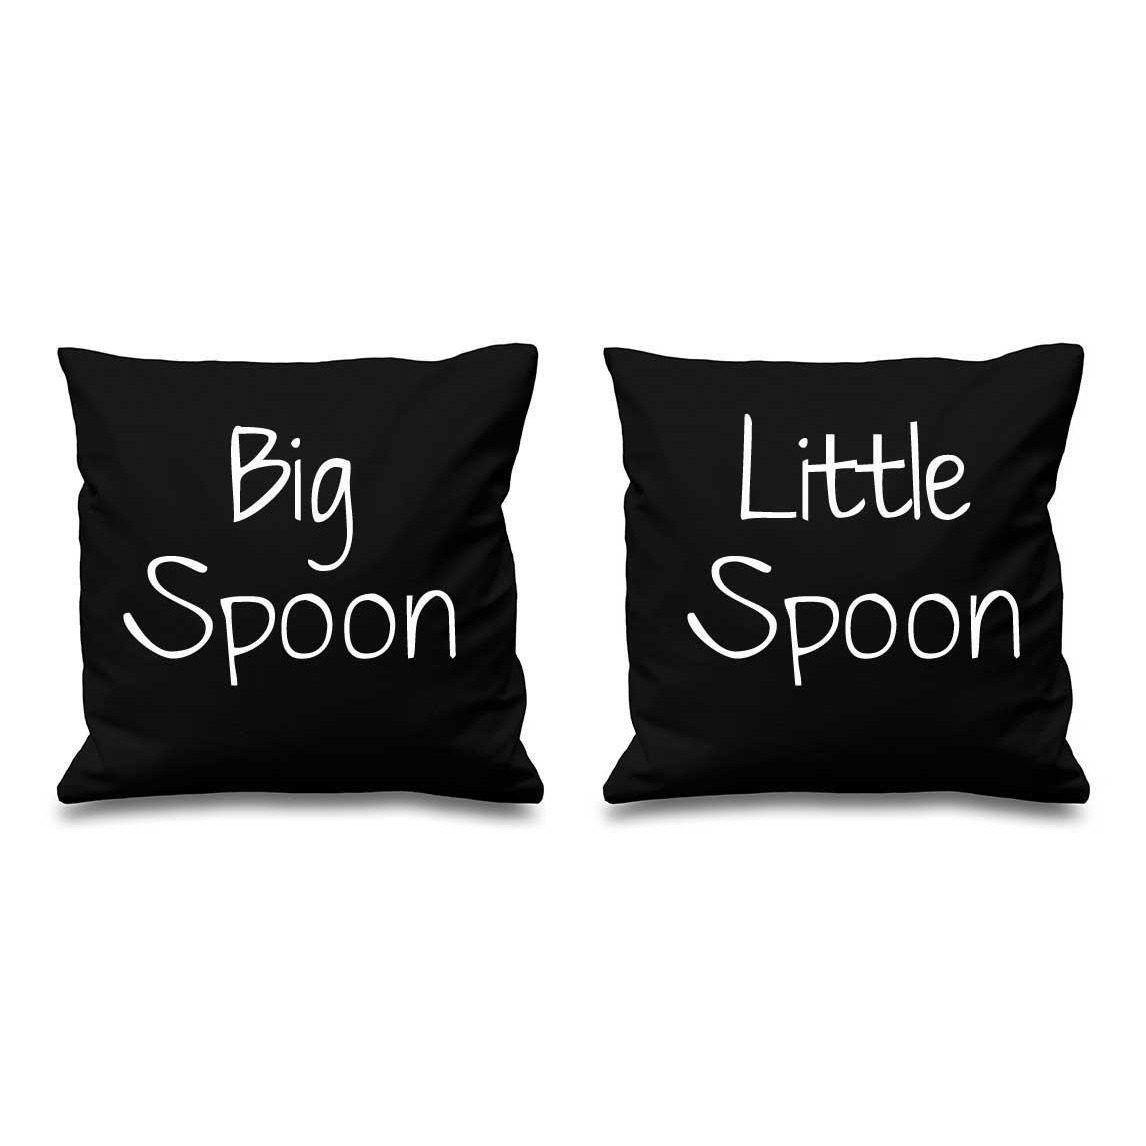 "Big Spoon Little Spoon Black Cushion Covers 16"" x 16"" Couples Cushions Valentines Wedding Anniversary Bedroom Decorative"